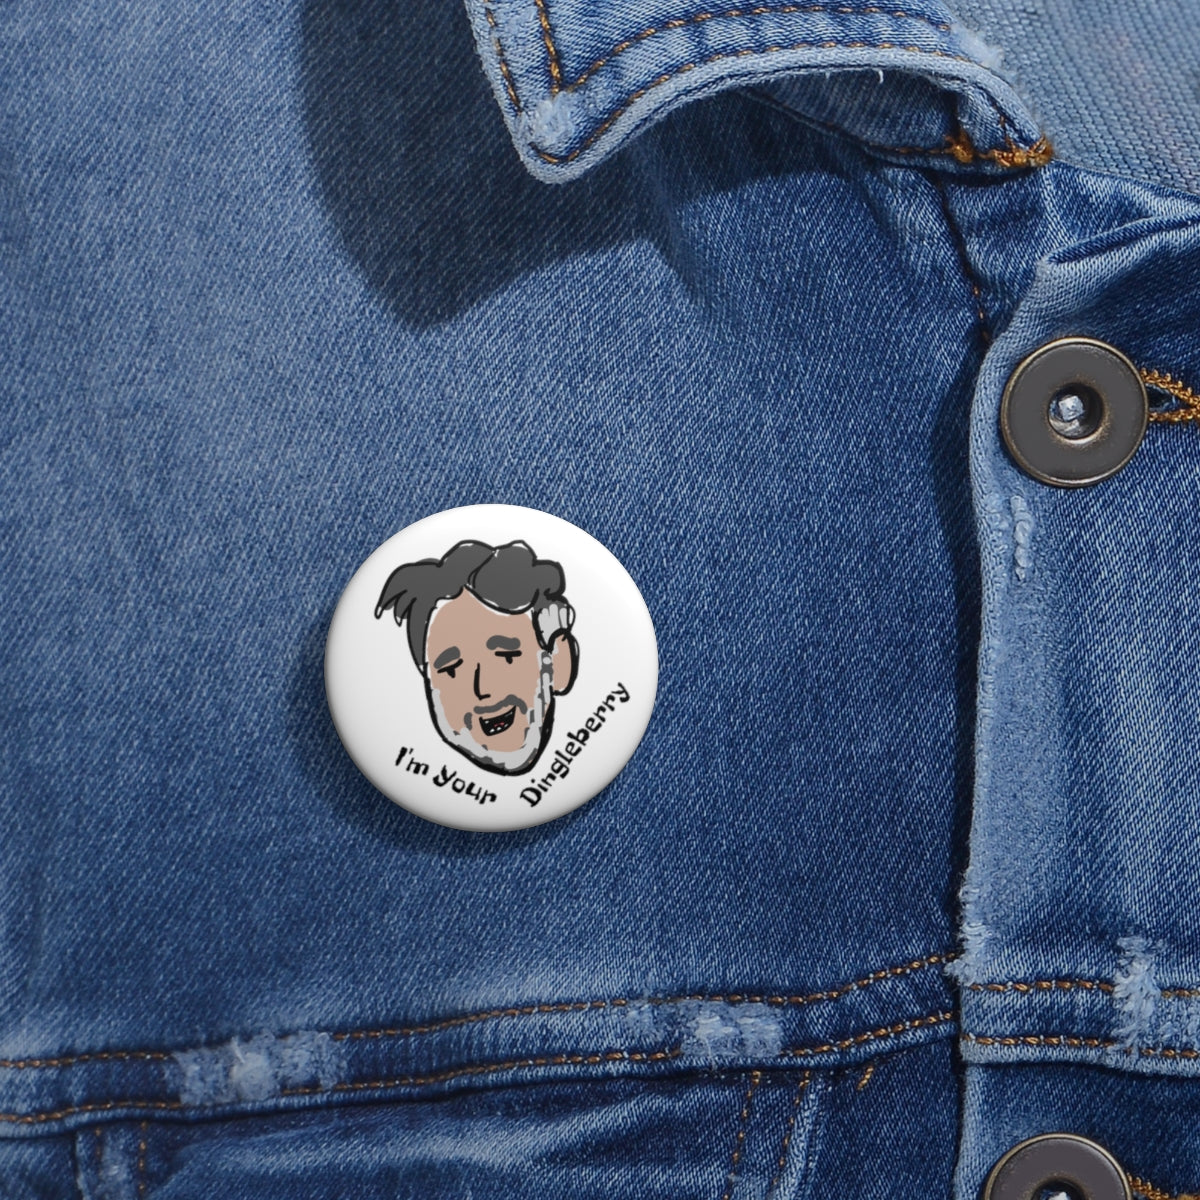 Barry Dingle says "I'm Your Dingleberry" - The Official Pin of The Goodbye Family